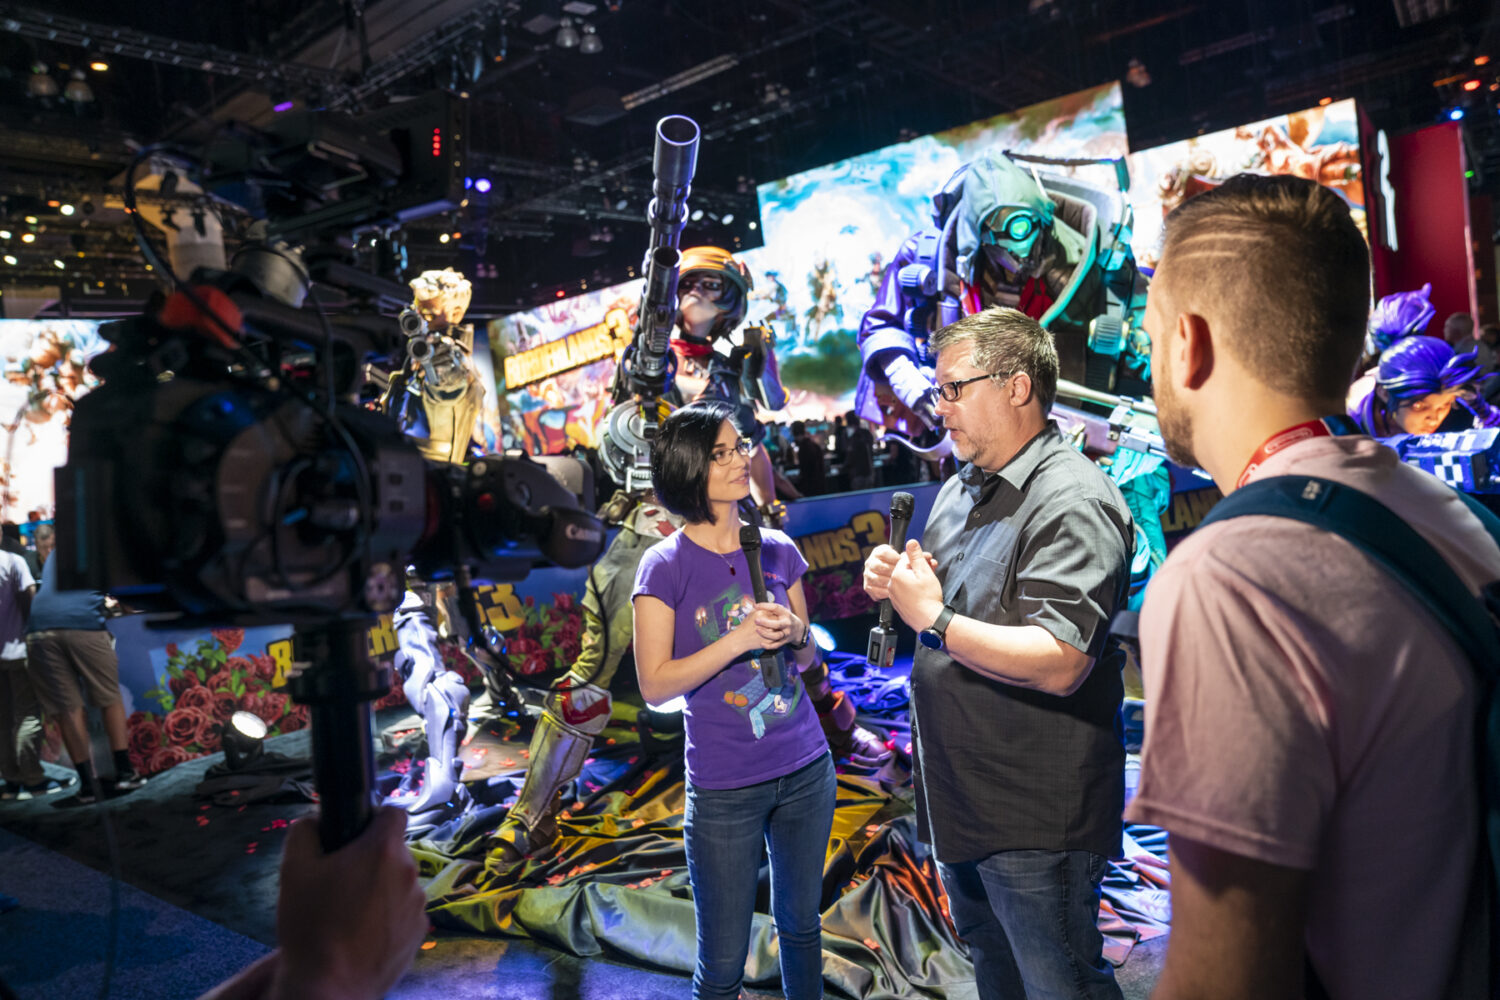 Image of LED panels at Borderlands display at E3 Electronic Entertainment Expo 2023